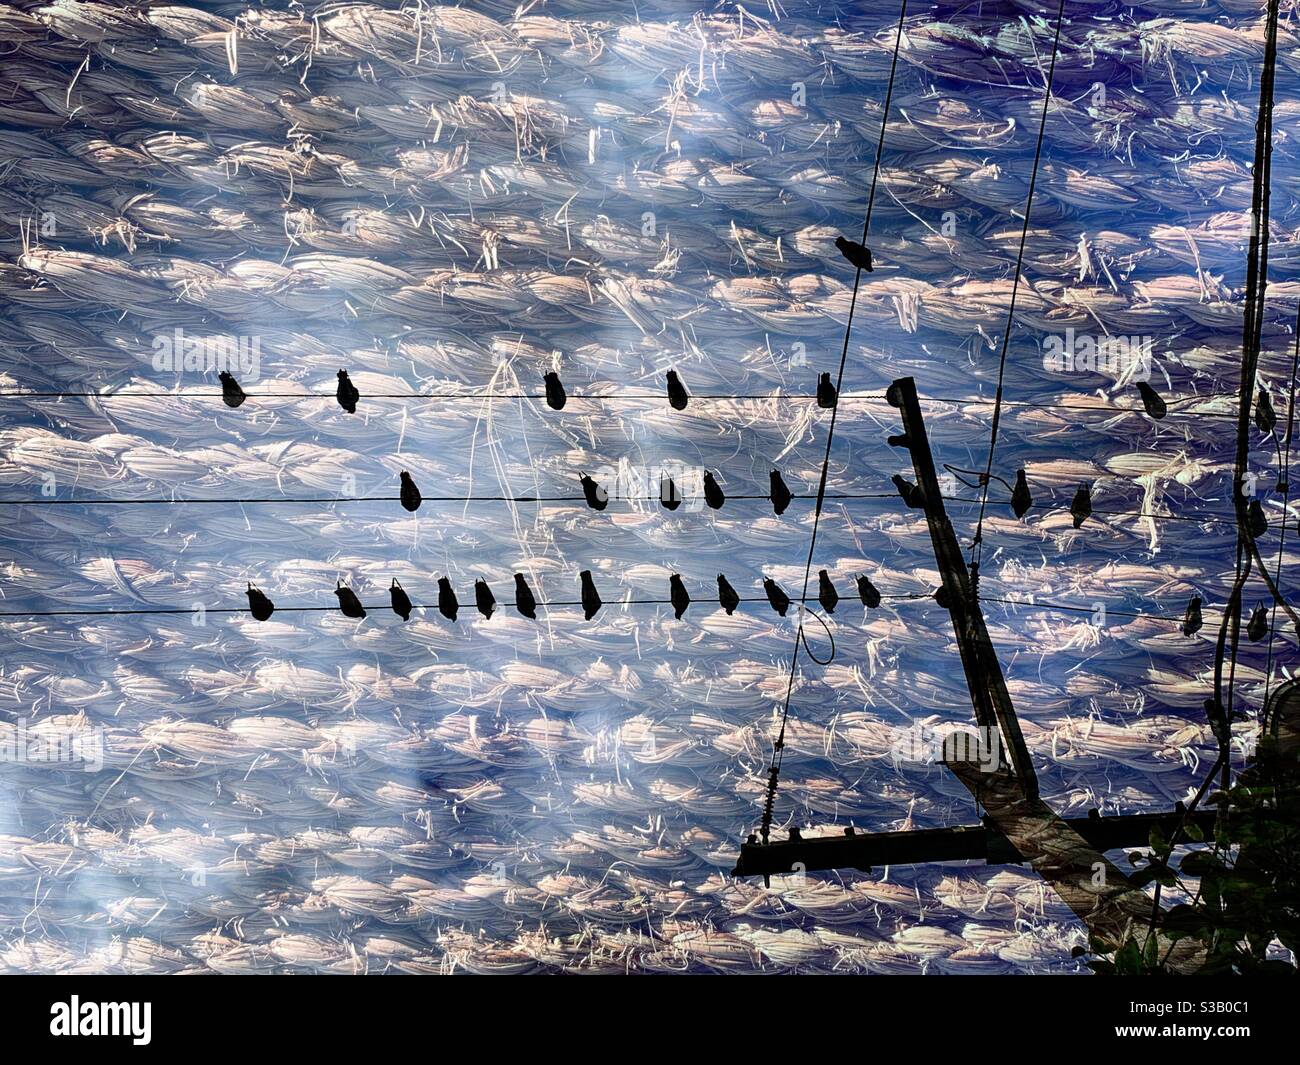 Profile of birds perched on a wire overlaying a rope texture. Stock Photo